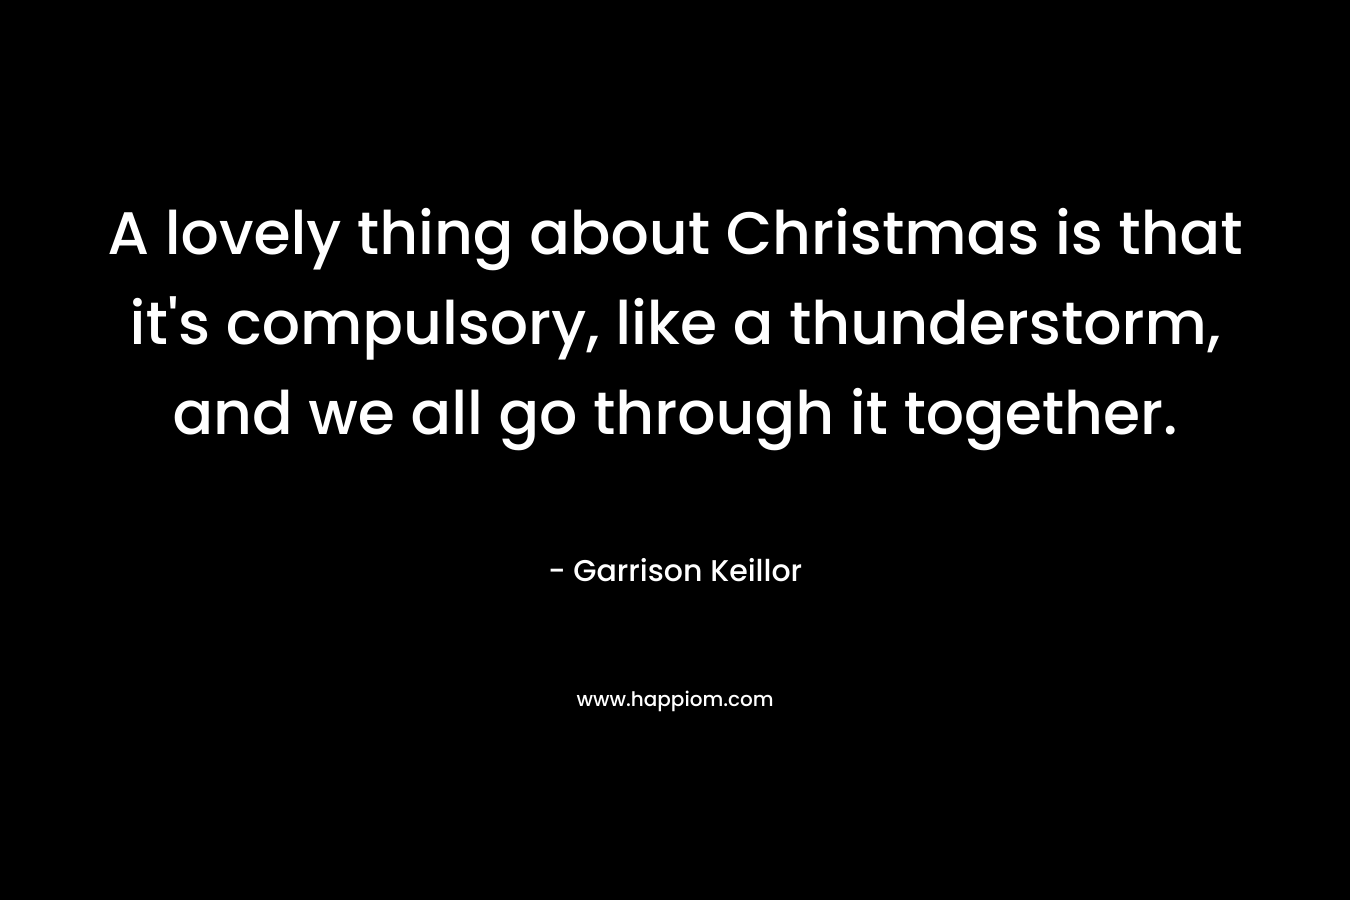 A lovely thing about Christmas is that it’s compulsory, like a thunderstorm, and we all go through it together. – Garrison Keillor